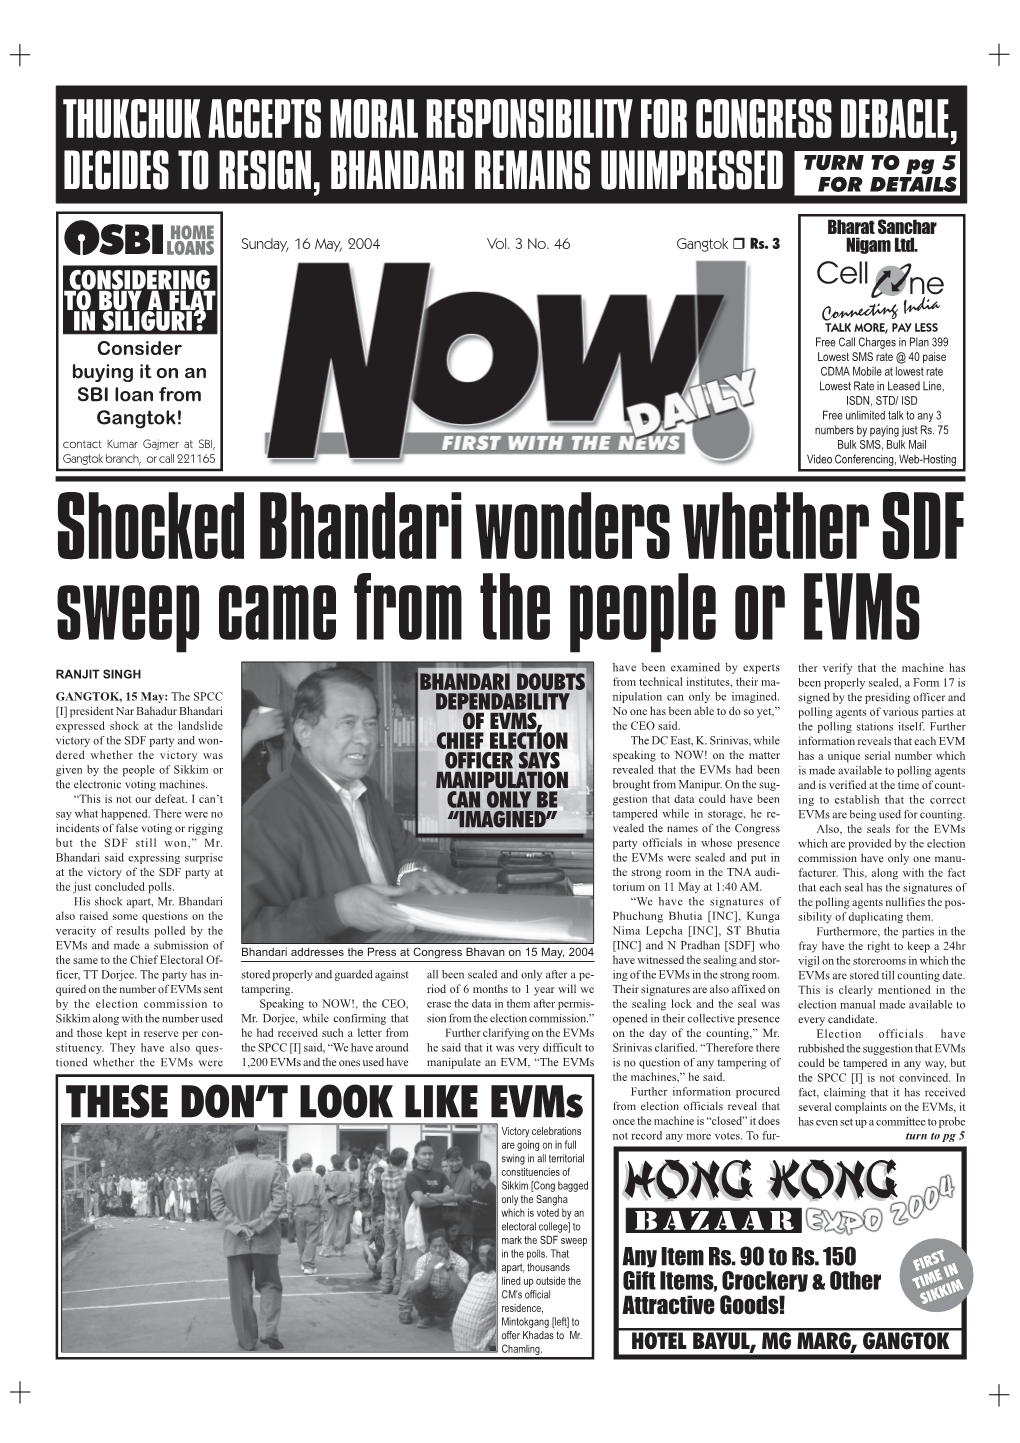 Shocked Bhandari Wonders Whether SDF Sweep Came from the People